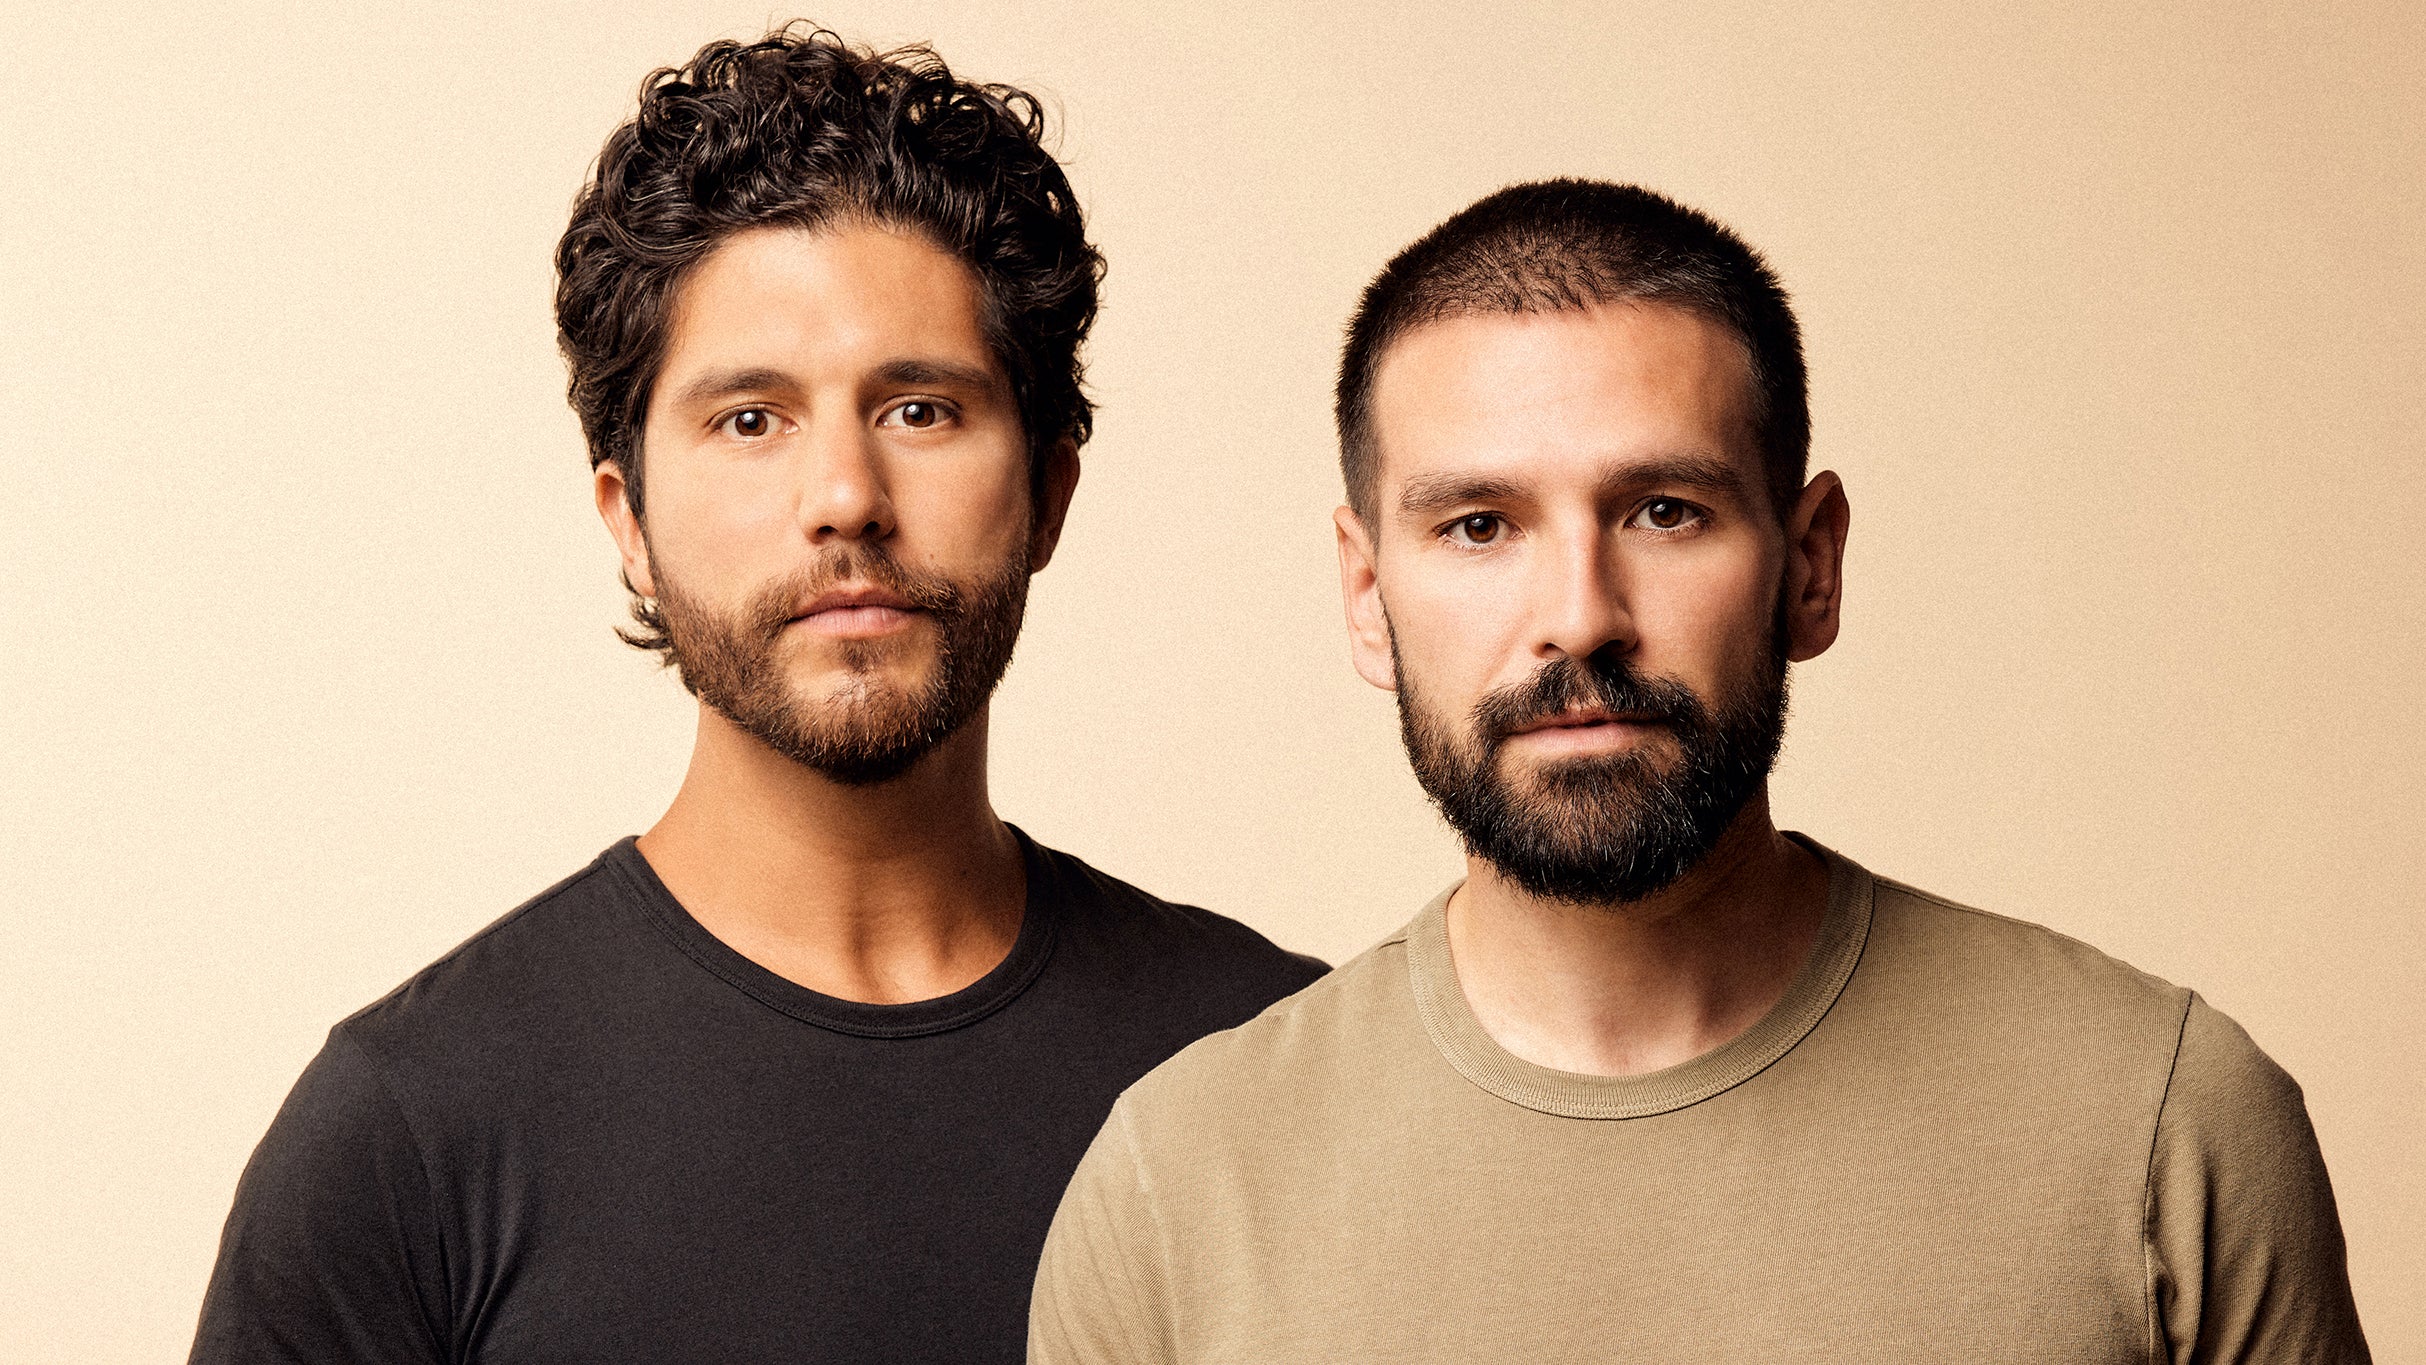 Dan + Shay: Heartbreak On The Map Tour presale password for concert tickets in Oklahoma City, OK (Paycom Center)